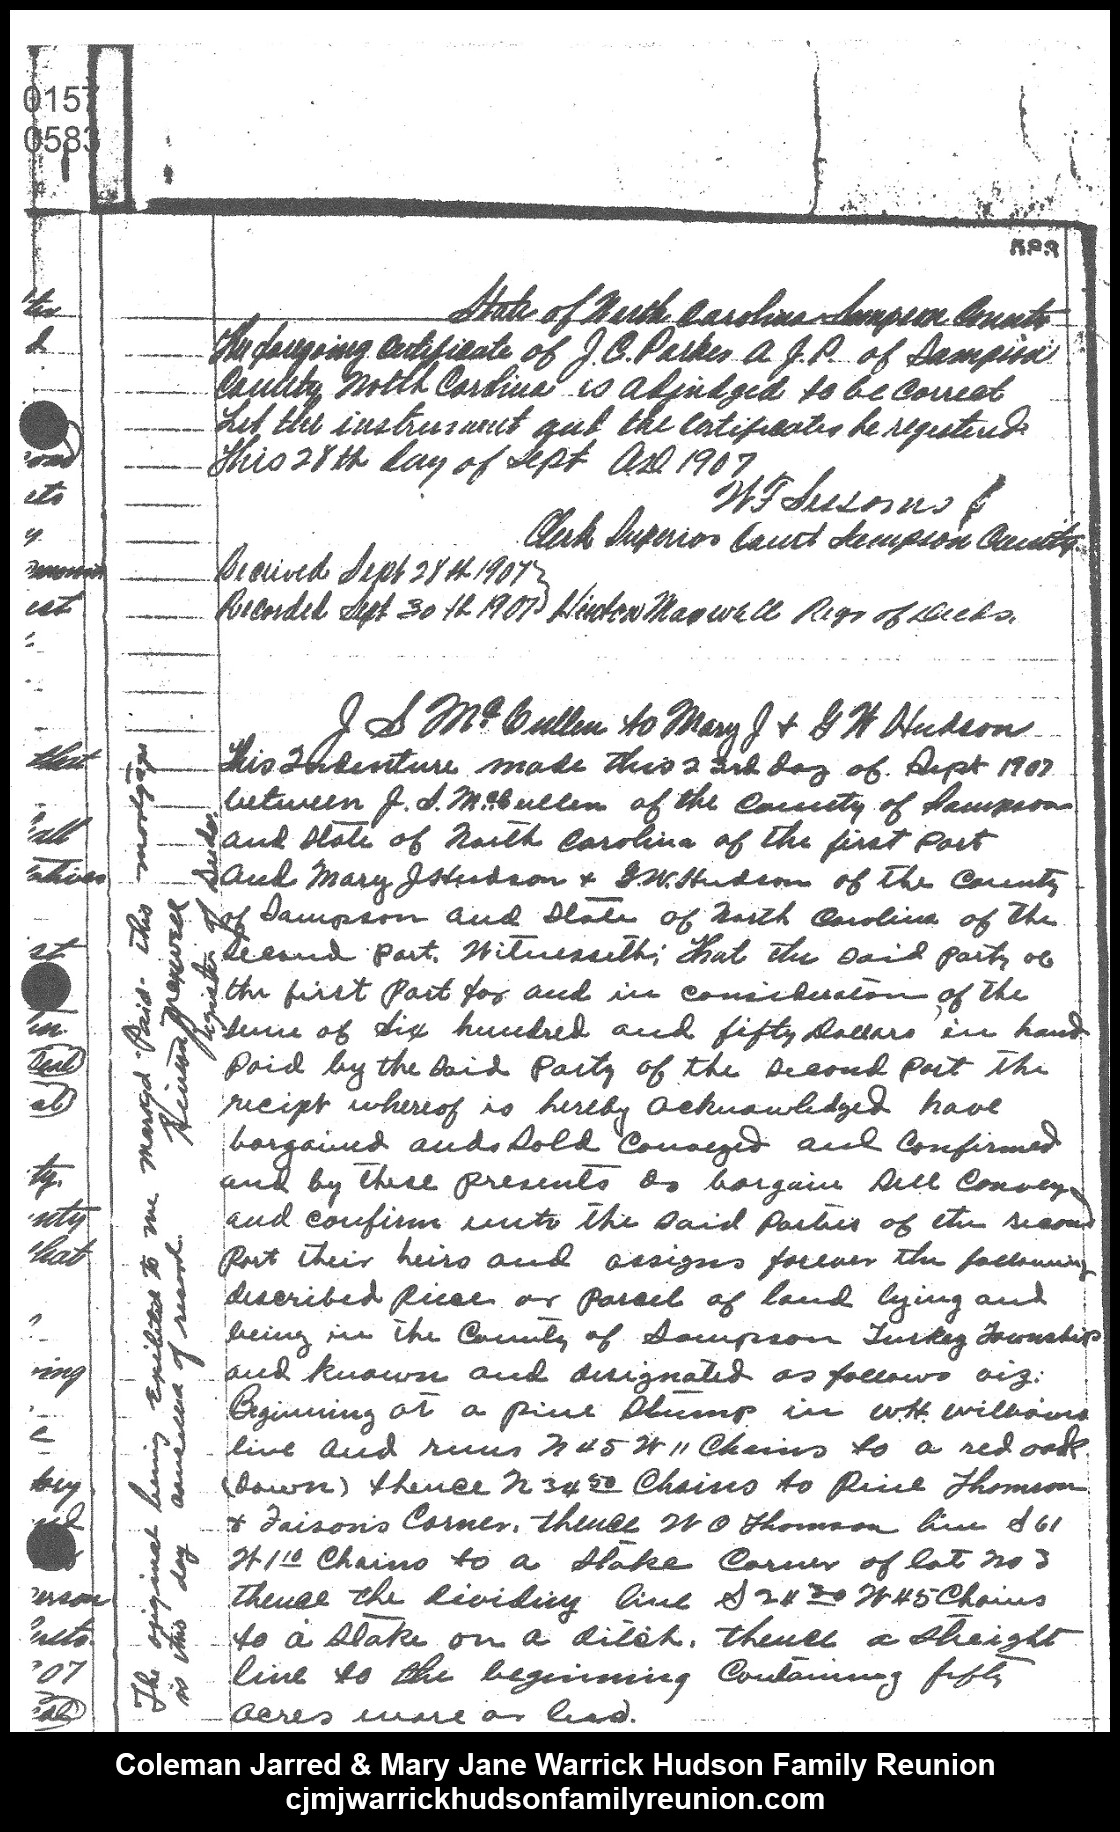 1907, 10-9 - Deed - J. S. McCullen to MJ & George ([page 1 of 3)